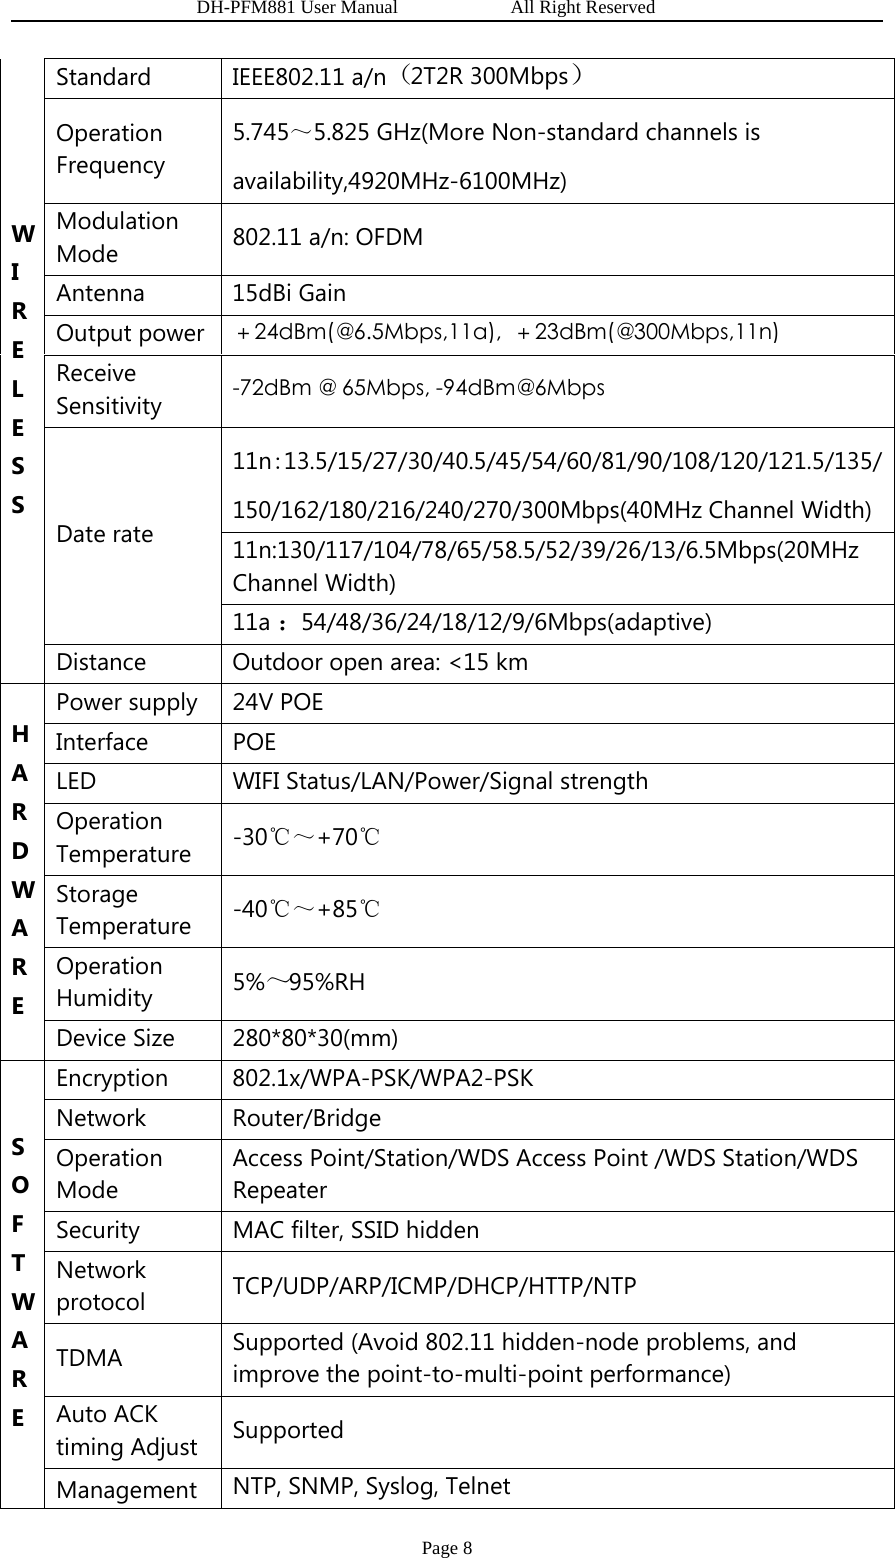                   DH-PFM881 User Manual            All Right Reserved Page 8 W I R E L E S S Standard IEEE802.11 a/n（2T2R 300Mbps） Operation Frequency 5.745～5.825 GHz(More Non-standard channels is availability,4920MHz-6100MHz) Modulation Mode  802.11 a/n: OFDM   Antenna 15dBi Gain Output power ＋24dBm(@6.5Mbps,11a),  ＋23dBm(@300Mbps,11n) Receive Sensitivity  -72dBm @ 65Mbps, -94dBm@6Mbps Date rate 11n:13.5/15/27/30/40.5/45/54/60/81/90/108/120/121.5/135/150/162/180/216/240/270/300Mbps(40MHz Channel Width) 11n:130/117/104/78/65/58.5/52/39/26/13/6.5Mbps(20MHz Channel Width) ：11a 54/48/36/24/18/12/9/6Mbps(adaptive) Distance  Outdoor open area: &lt;15 km H A R D W A R E Power supply  24V POE Interface POE LED  WIFI Status/LAN/Power/Signal strength   Operation Temperature  -30℃～+70℃ Storage Temperature  -40℃～+85℃ Operation Humidity  5～%95%RH Device Size  280*80*30(mm) S O F T W A R E Encryption 802.1x/WPA-PSK/WPA2-PSK Network Router/Bridge Operation Mode Access Point/Station/WDS Access Point /WDS Station/WDS Repeater Security  MAC filter, SSID hidden Network protocol  TCP/UDP/ARP/ICMP/DHCP/HTTP/NTP TDMA   Supported (Avoid 802.11 hidden-node problems, and improve the point-to-multi-point performance) Auto ACK timing Adjust  Supported Management  NTP, SNMP, Syslog, Telnet 